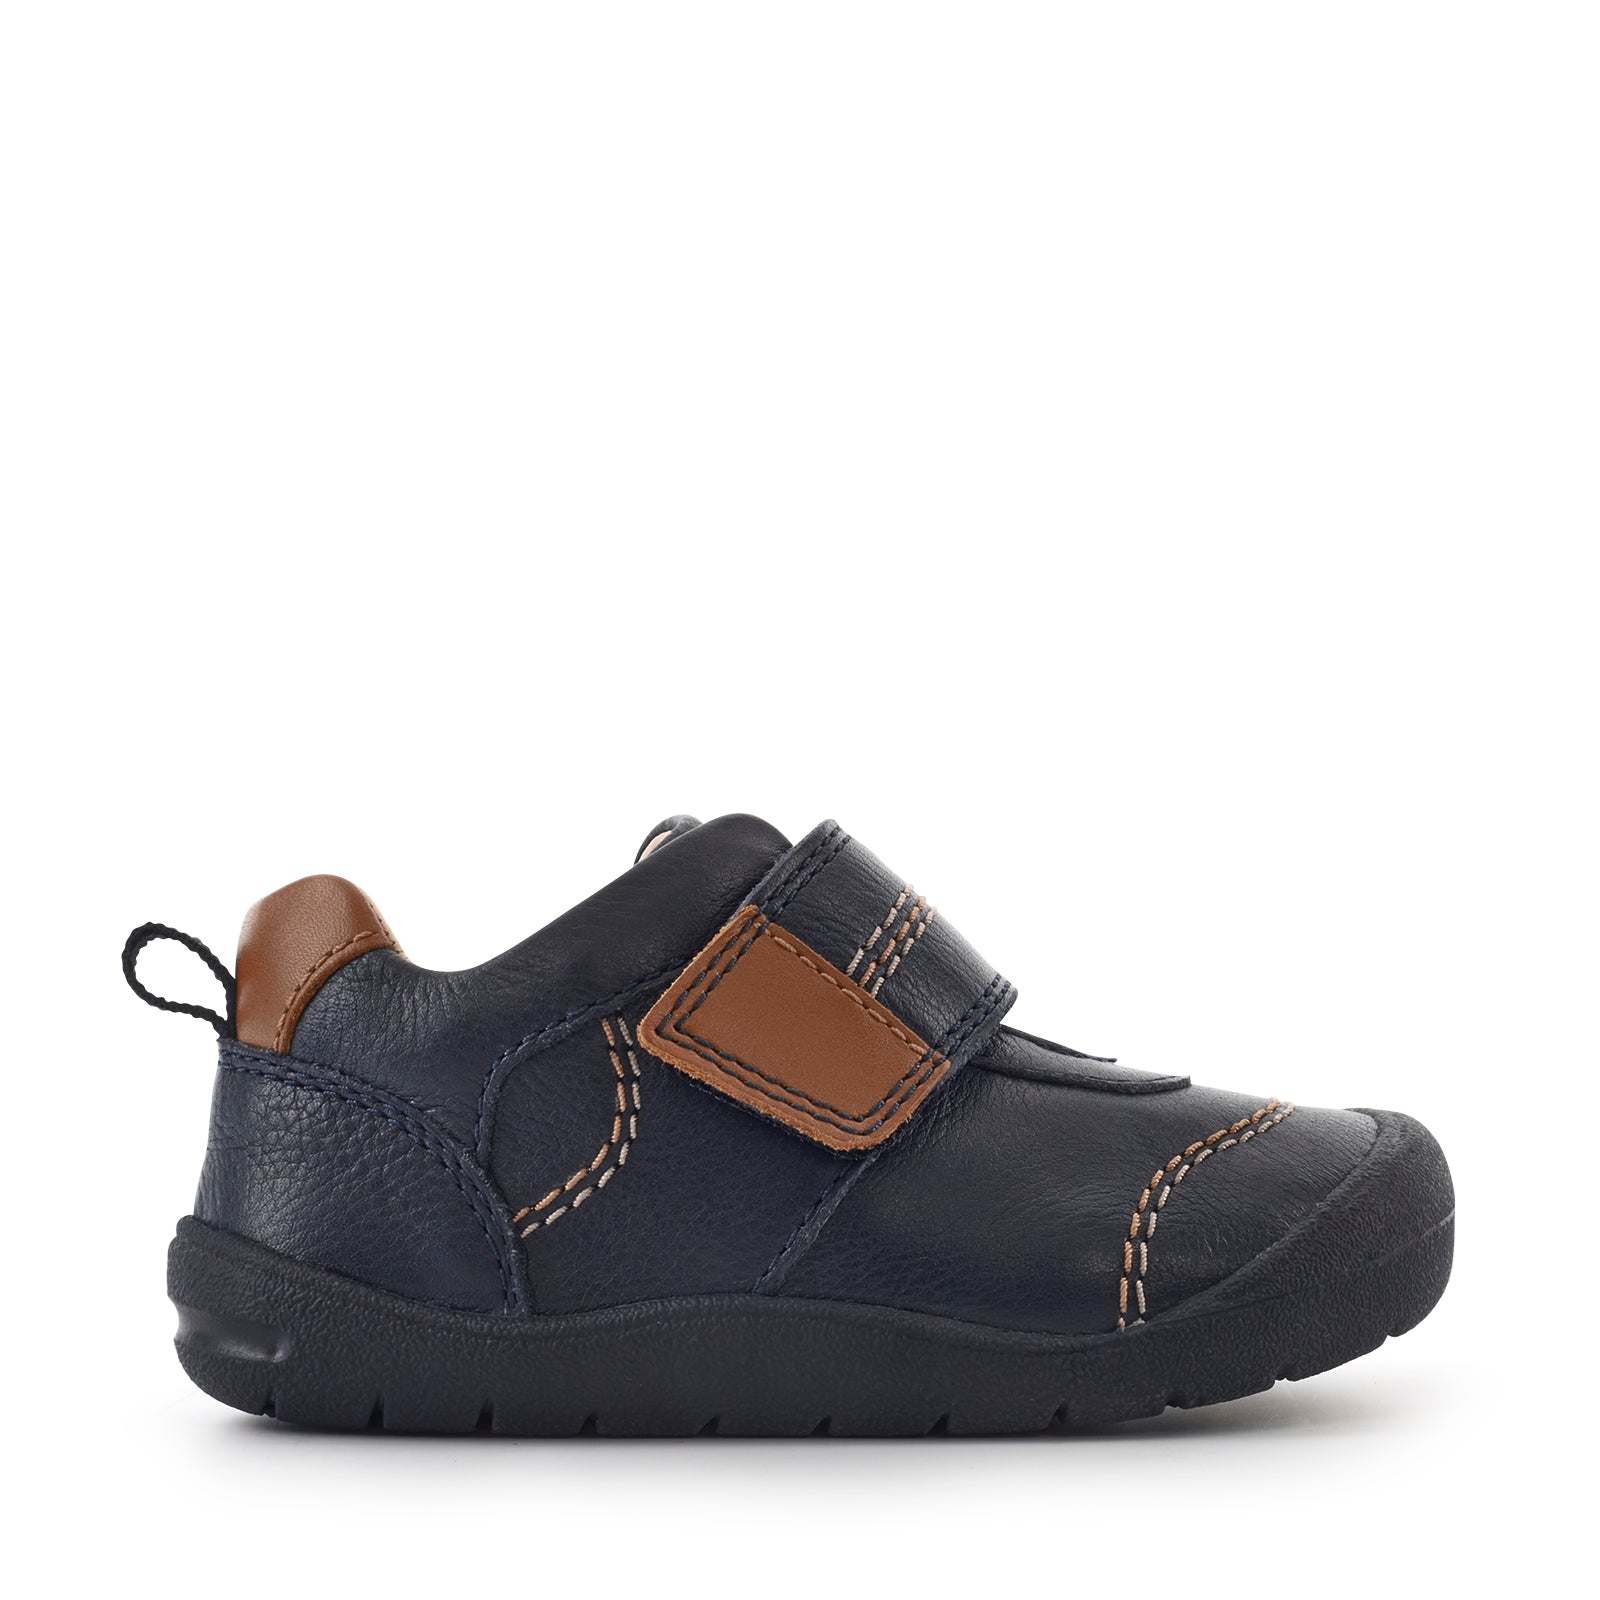 A boys first shoe by Start-Rite, style Footprint, in navy with tan trim and stitch detailing with velcro fastening. Right side view.